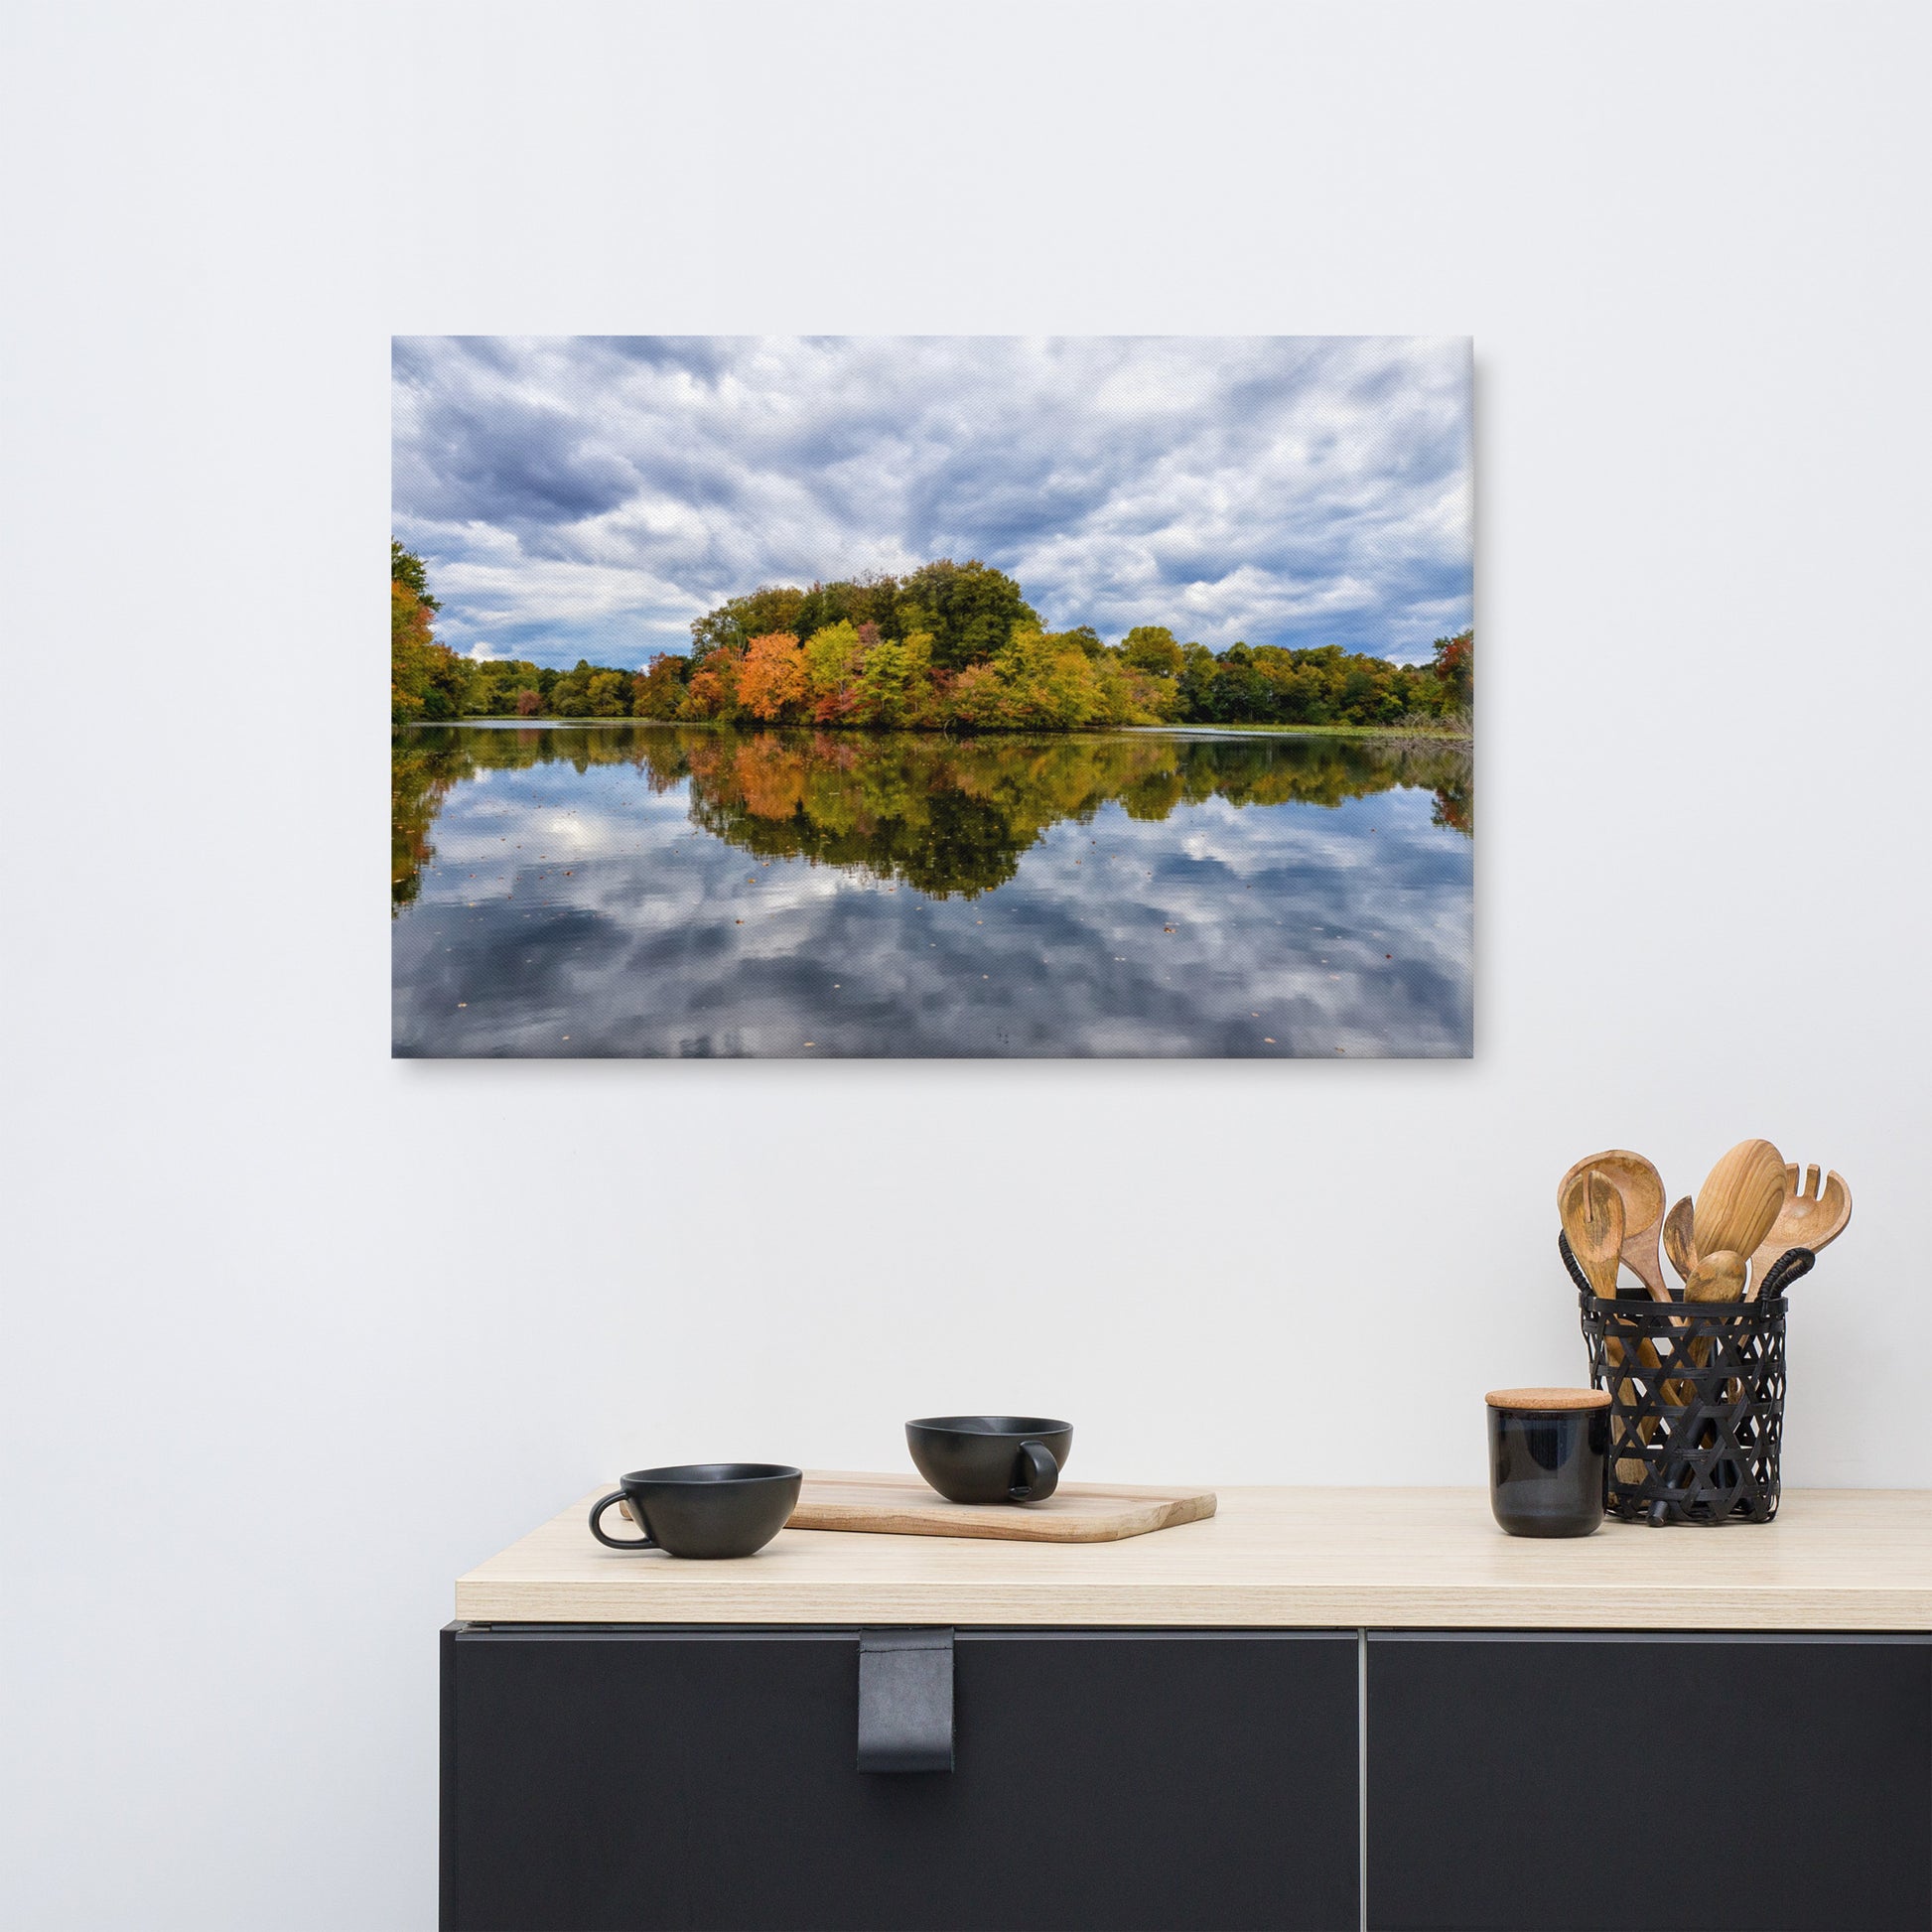 Canvas Dining Room: Autumn Reflections - Farmhouse / Rural / Country Style Landscape / Nature Photograph Canvas Wall Art Print - Artwork - Wall Decor